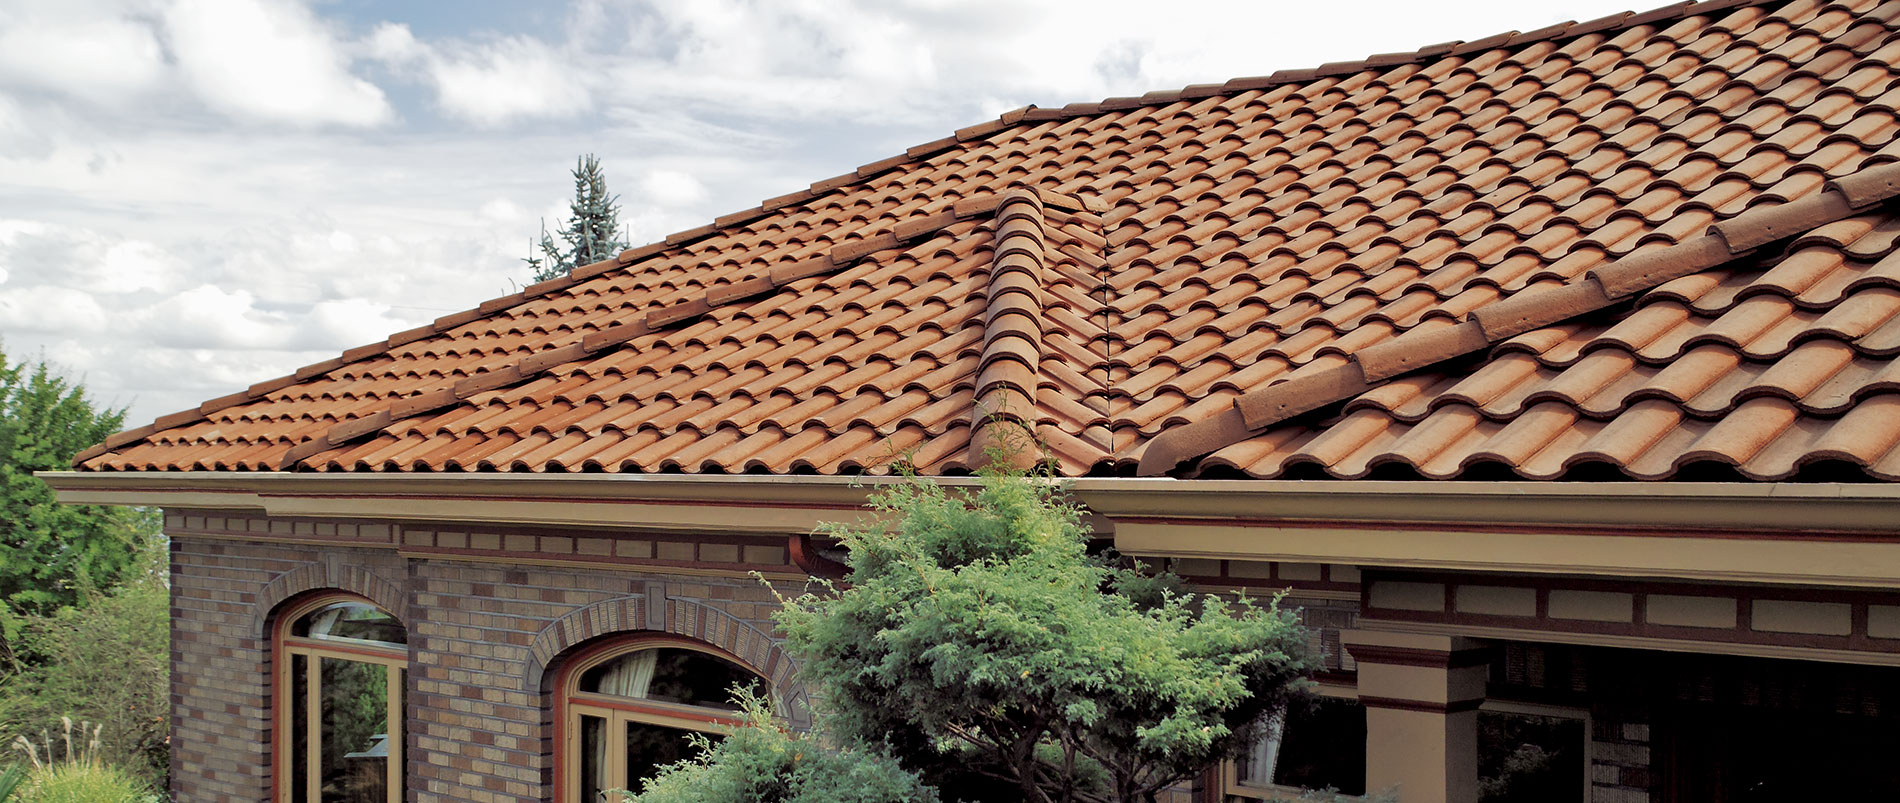 house with a tile roof